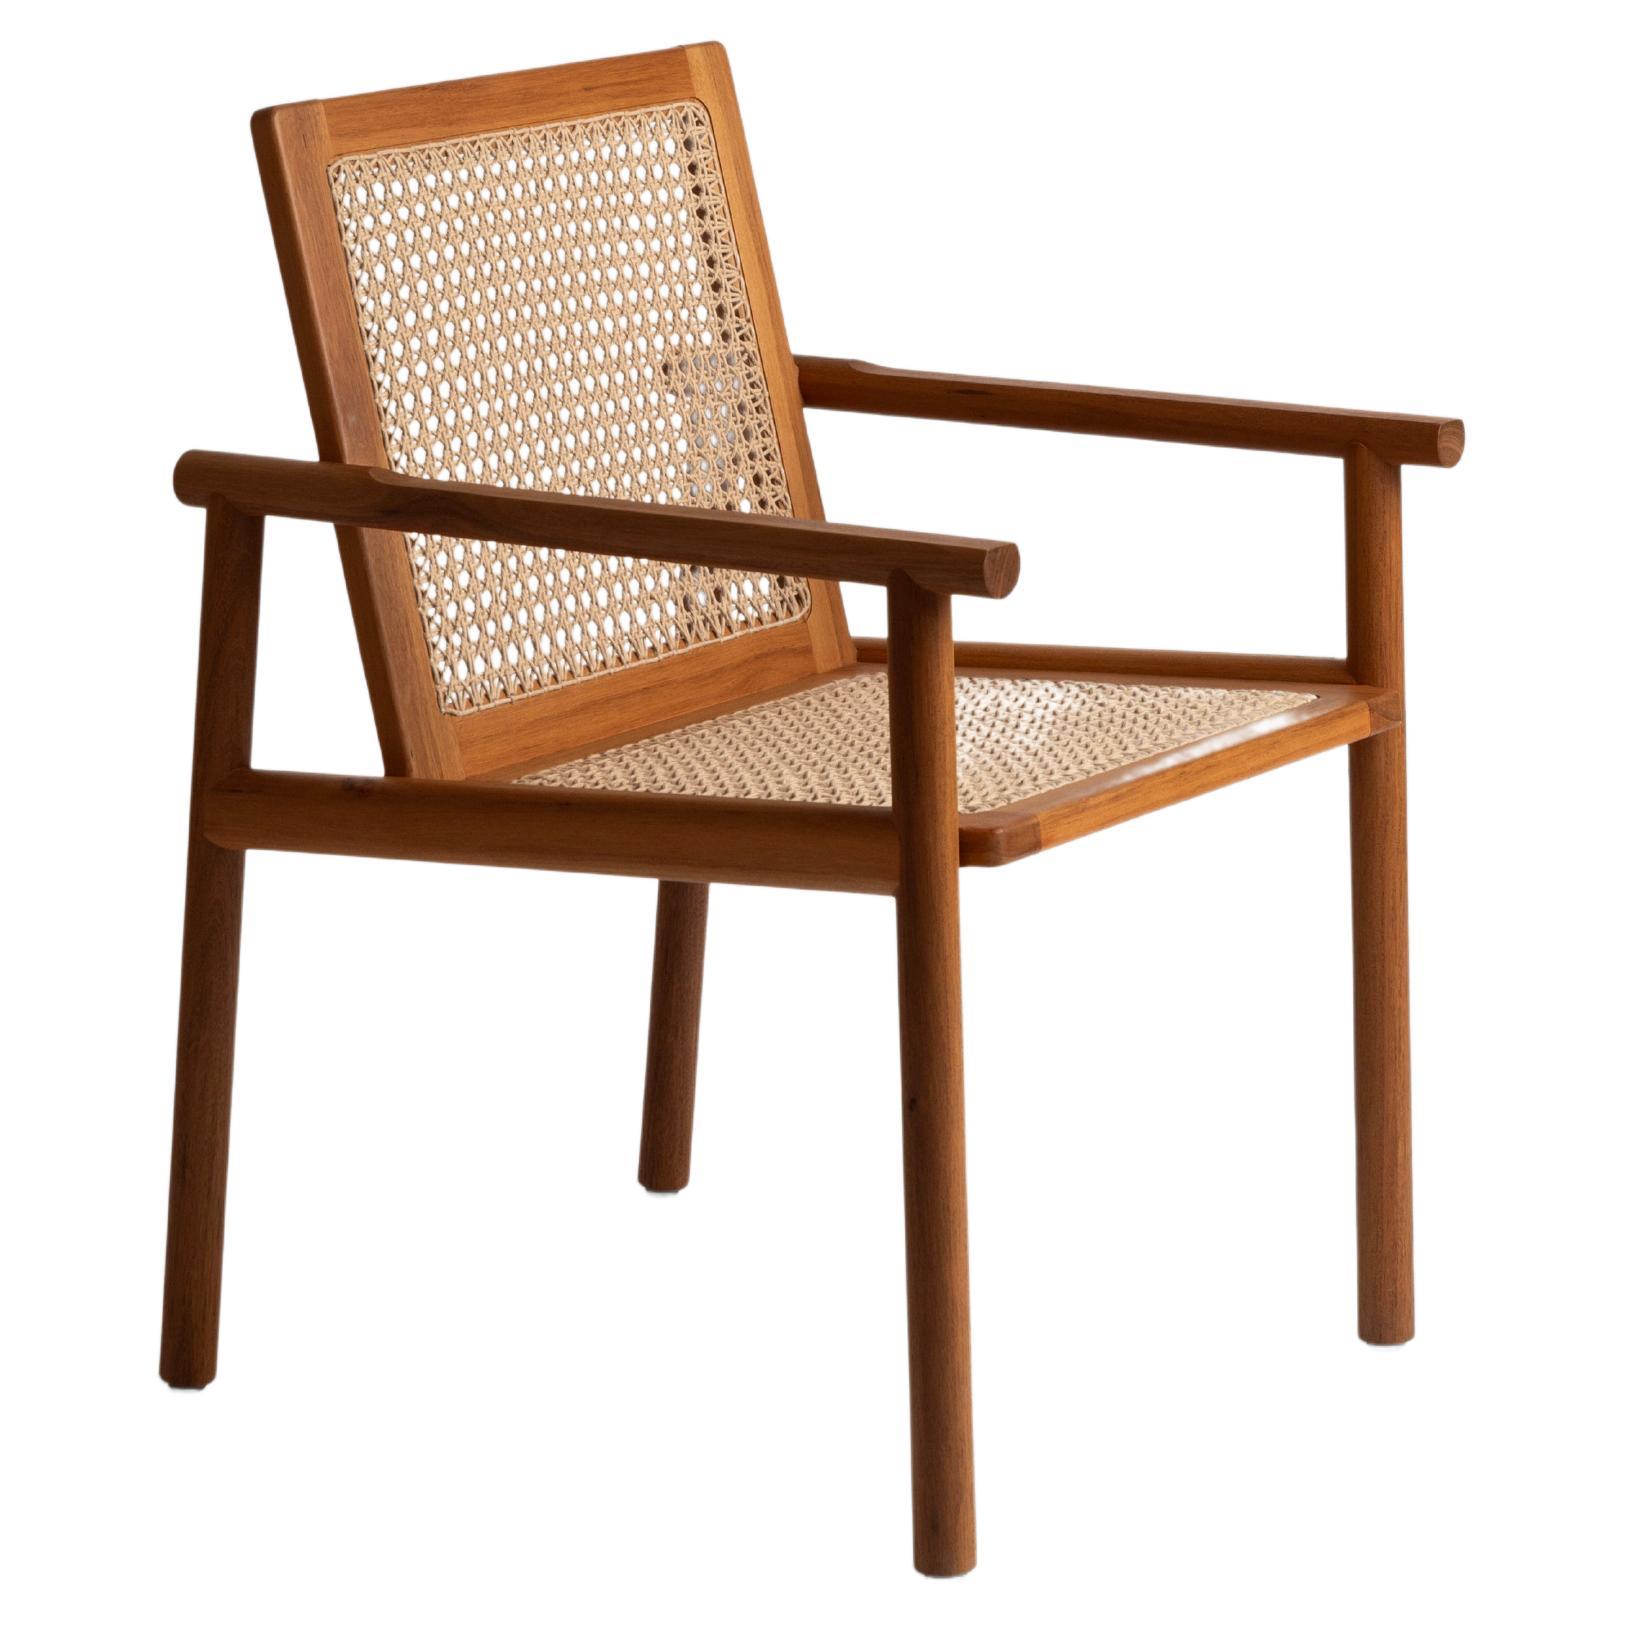 contemporary and Mexican design, produced in Mexico, chair, by ITZ 